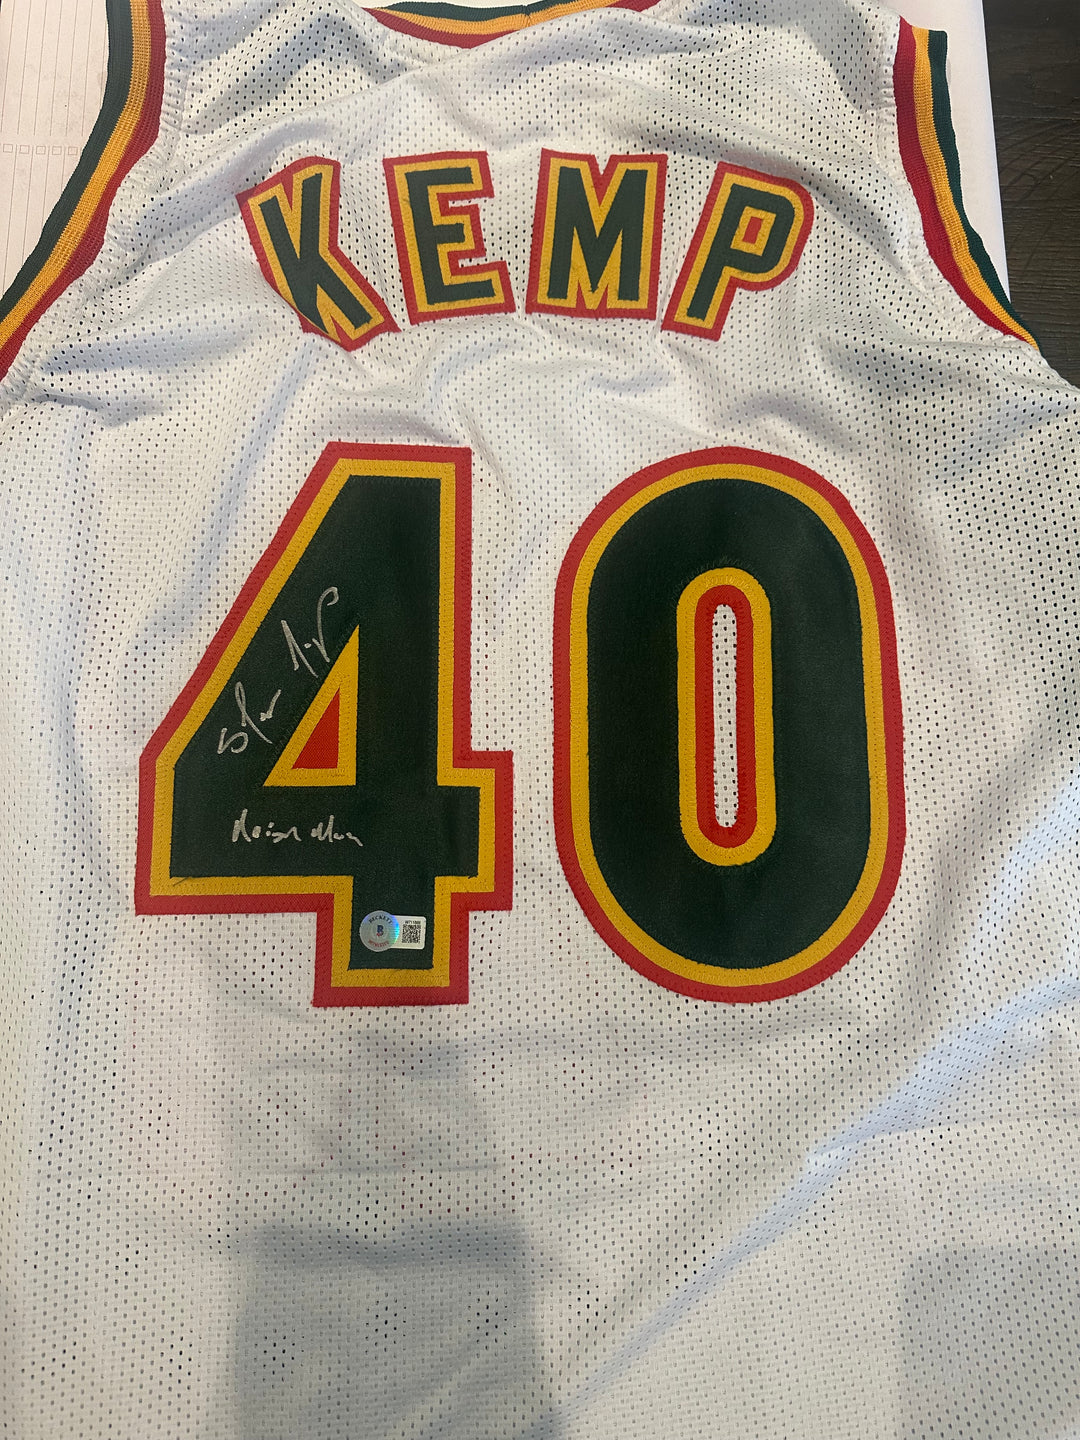 Shawn Kemp signed custom Sonics jersey with "Reign Man"ins